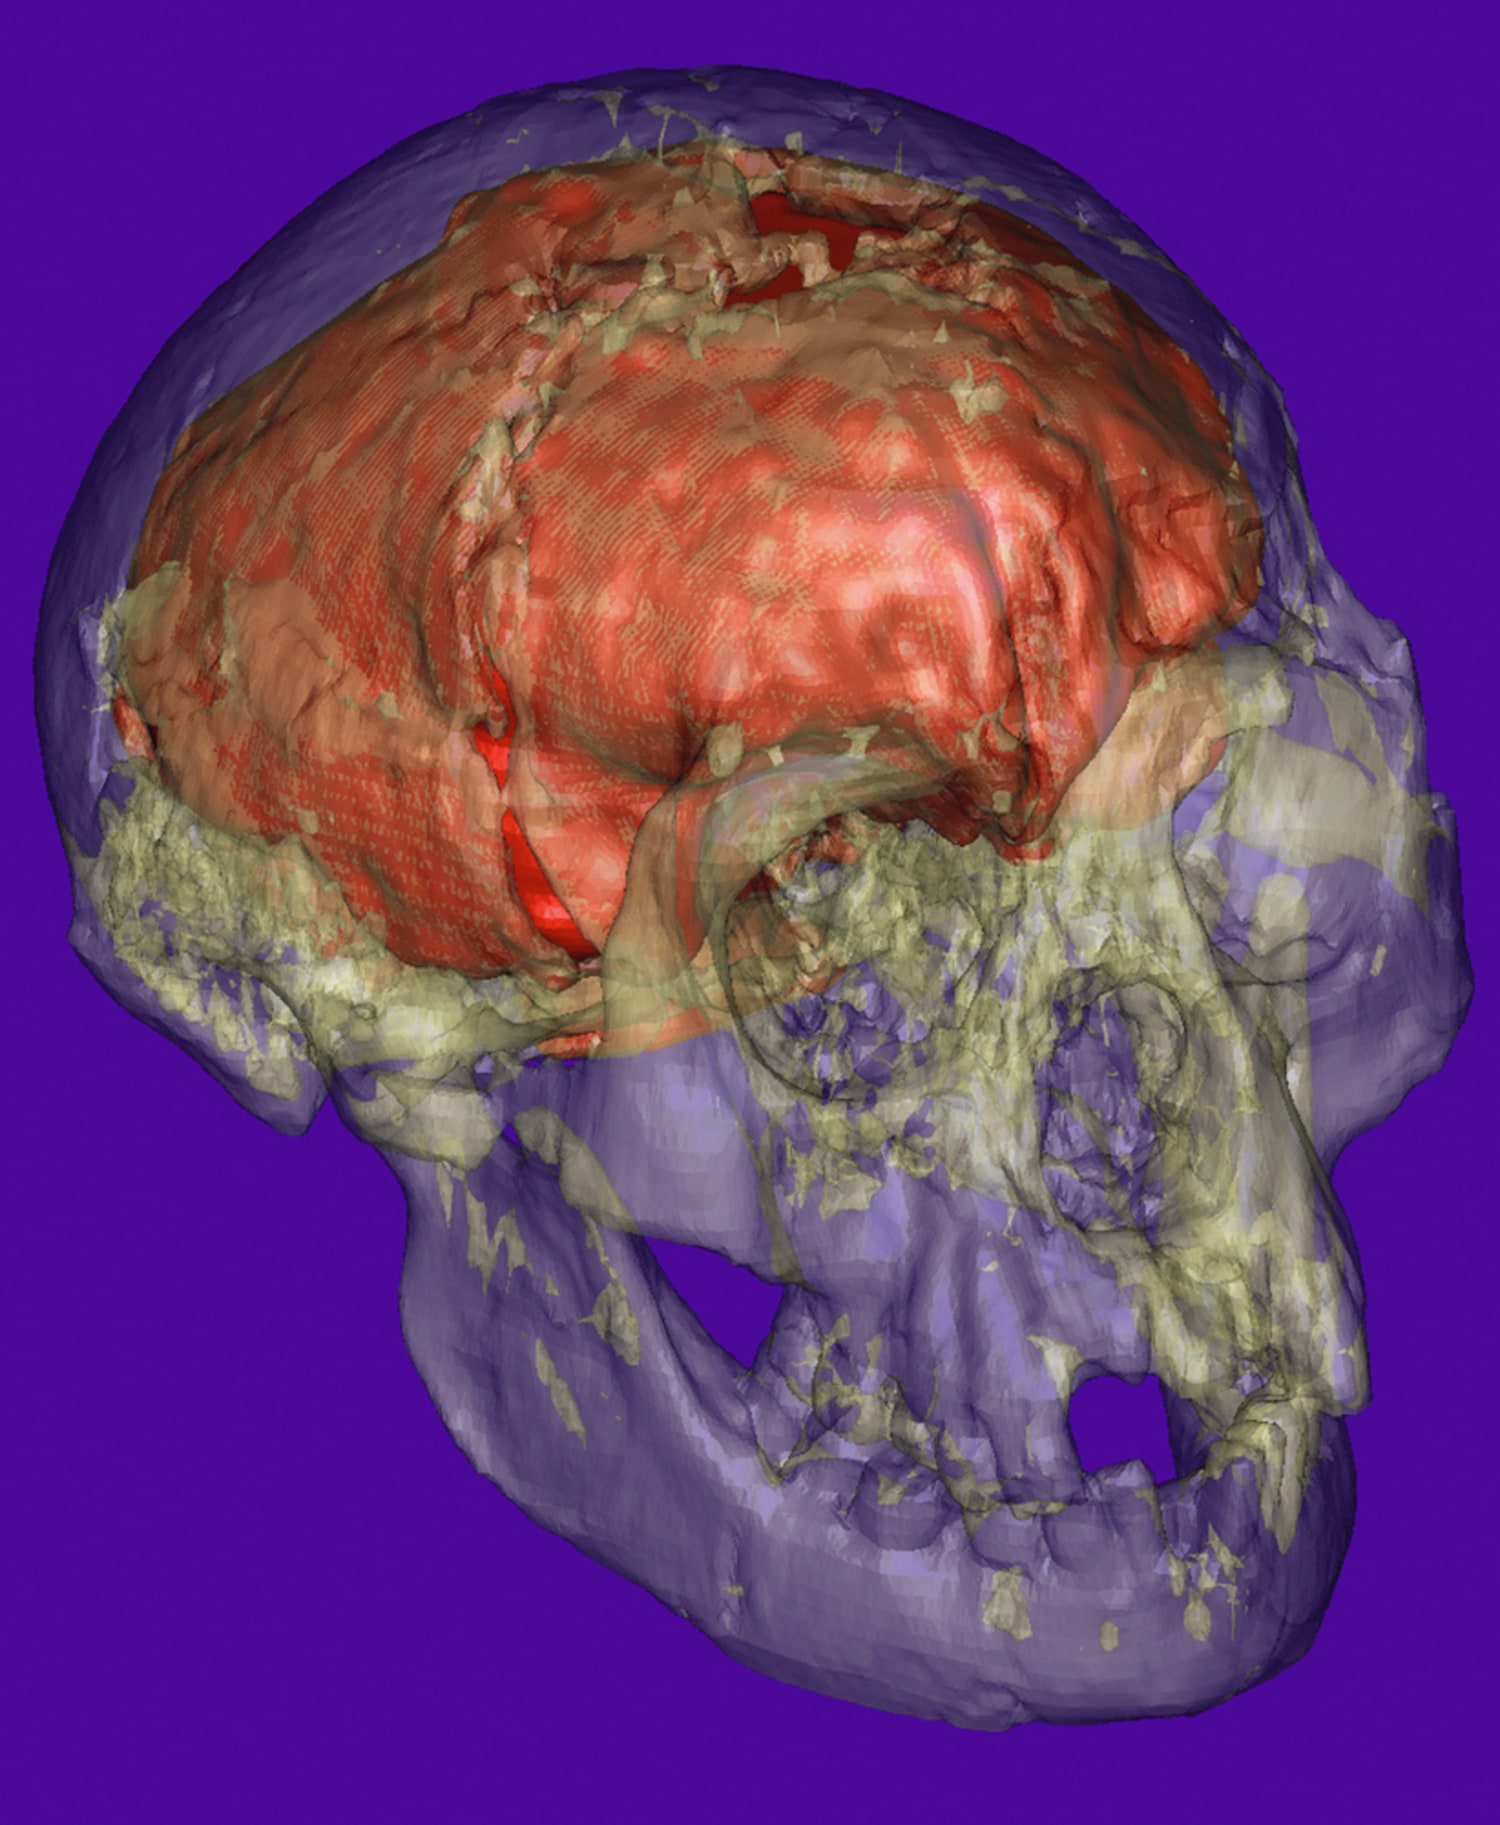 Information: The real weight of the brain inside the skull is 1200